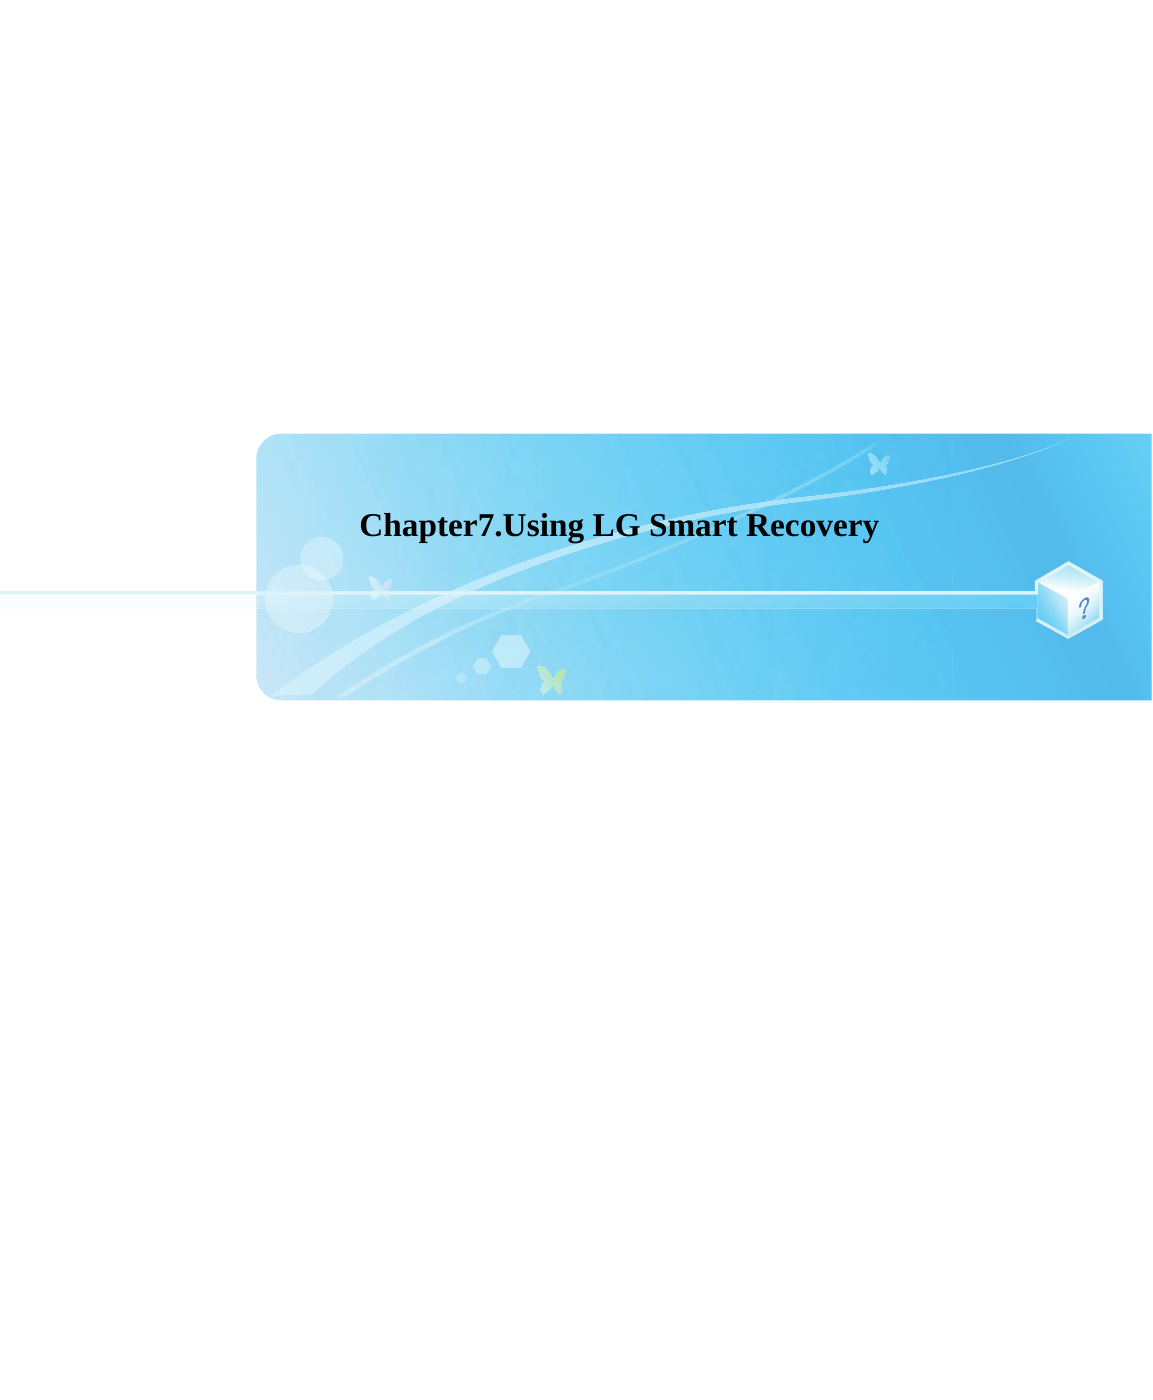 Chapter7.Using LG Smart Recovery